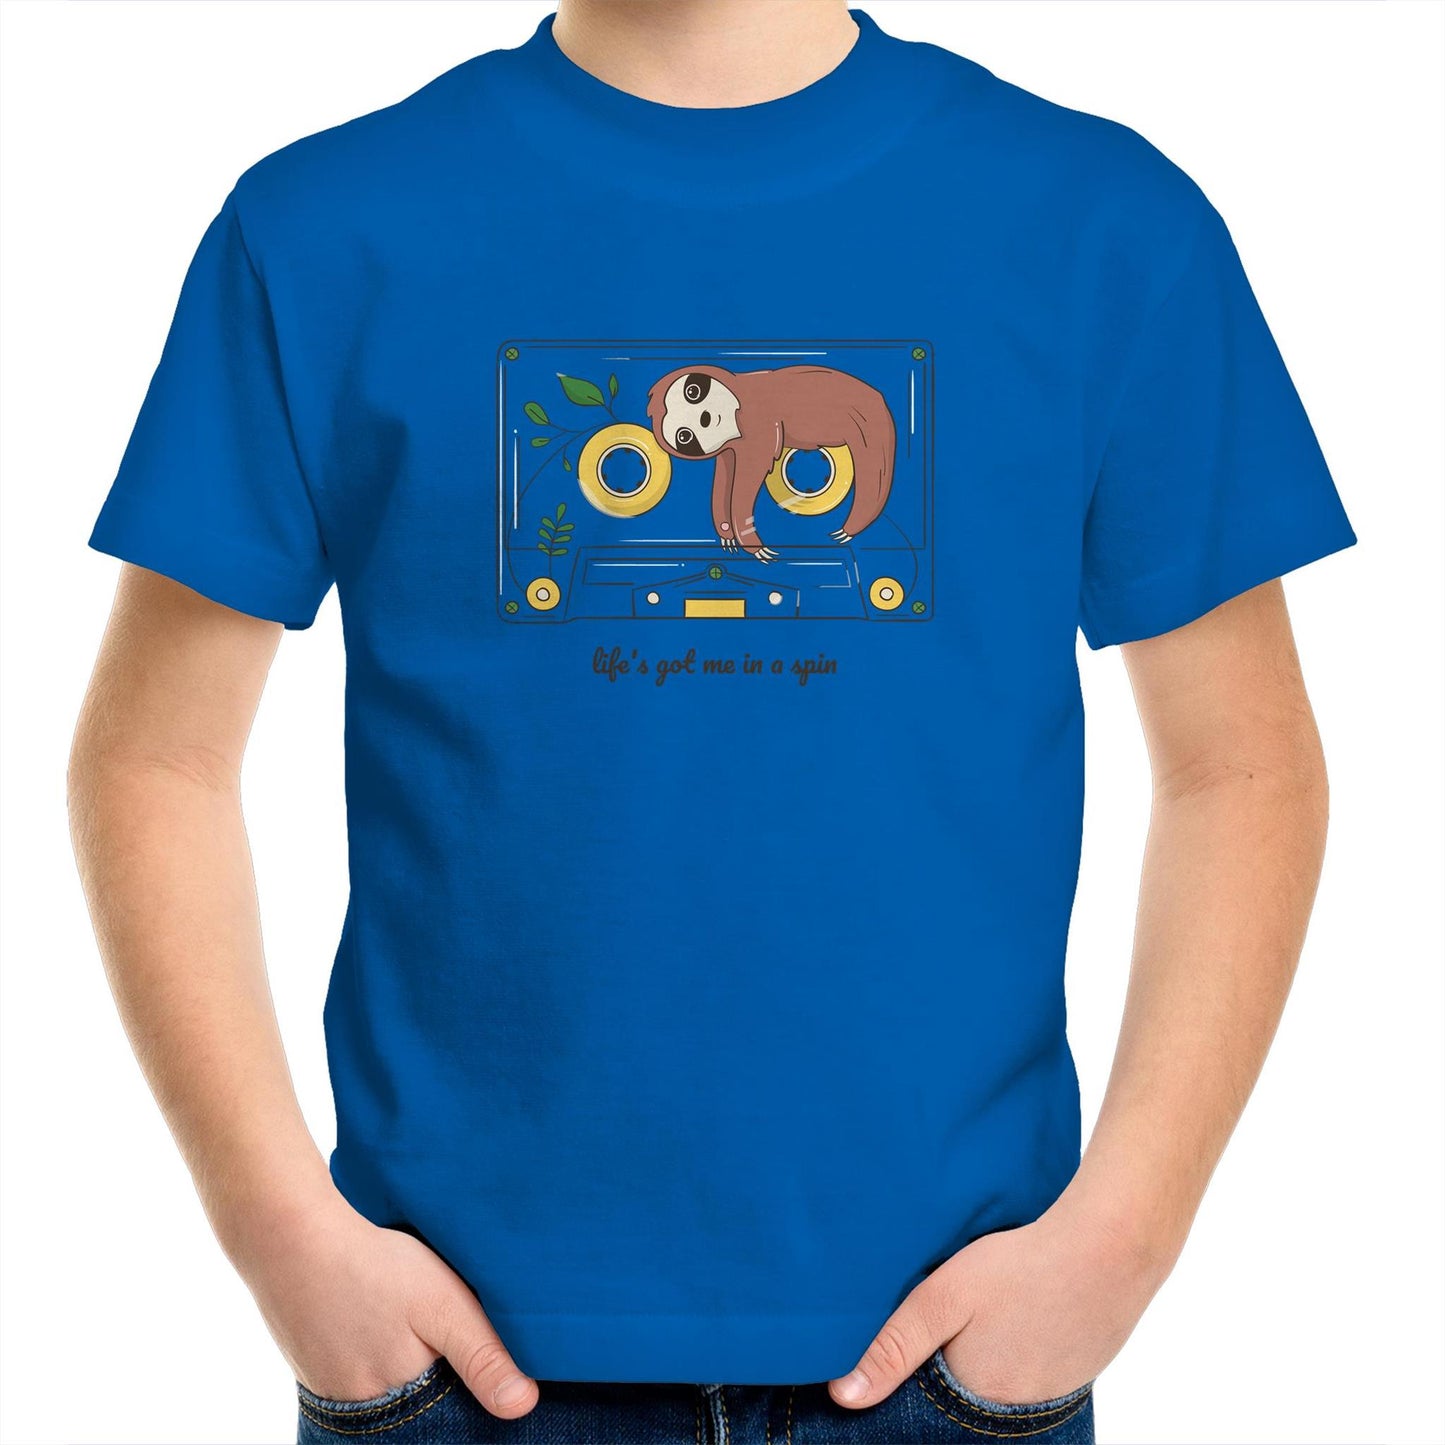 Cassette, Life's Got Me In A Spin - Kids Youth Crew T-Shirt Bright Royal Kids Youth T-shirt animal Music Retro